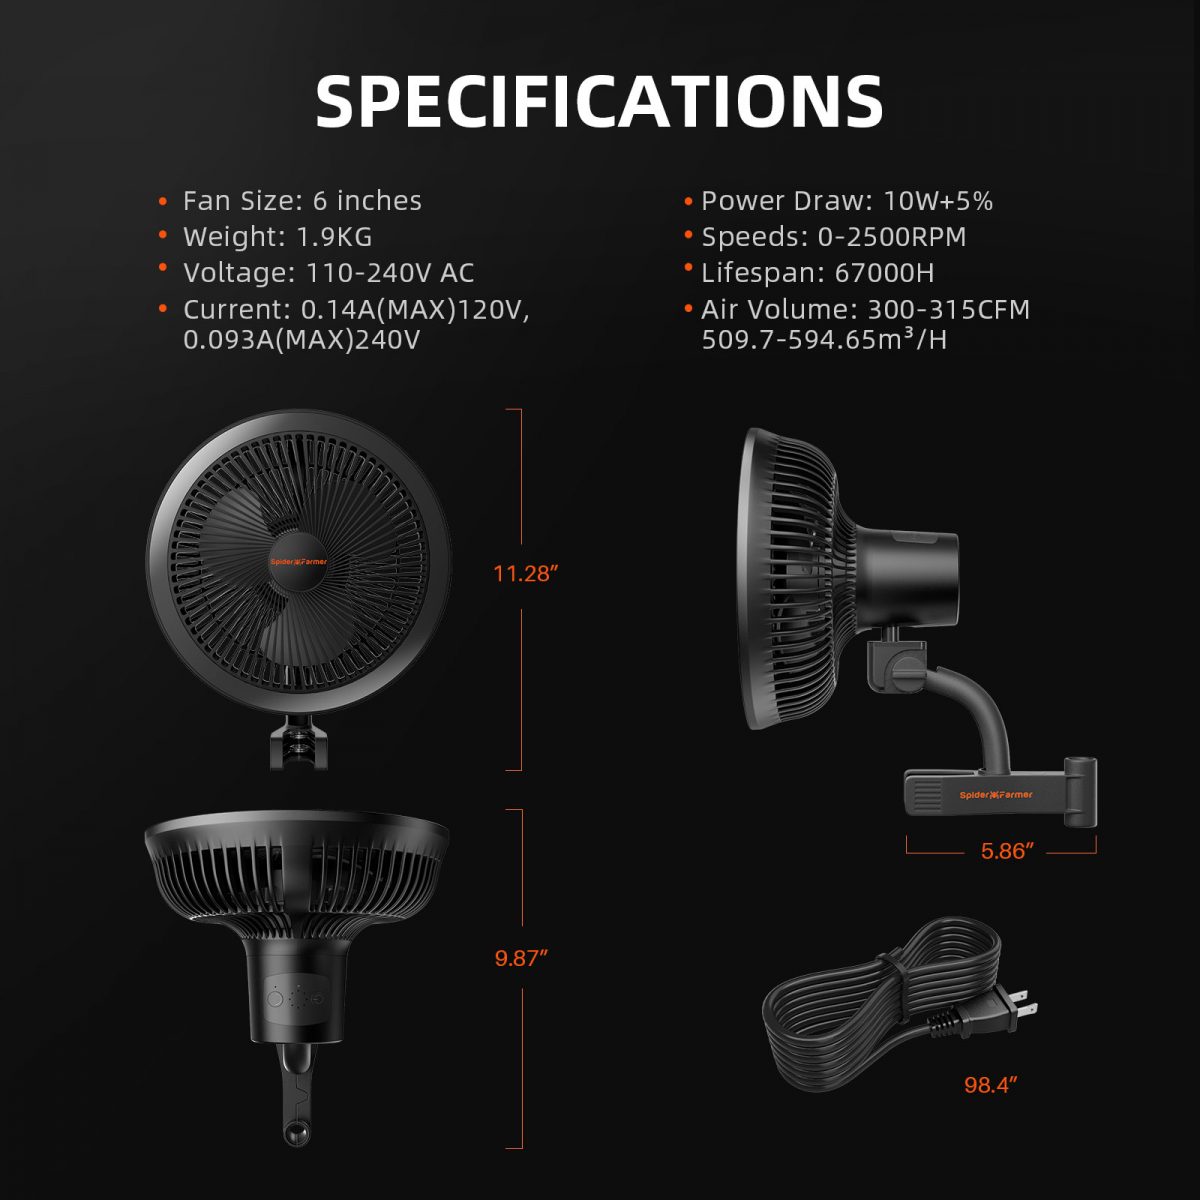 Spider Farmer clip fan specification diagram, detailing features and dimensions